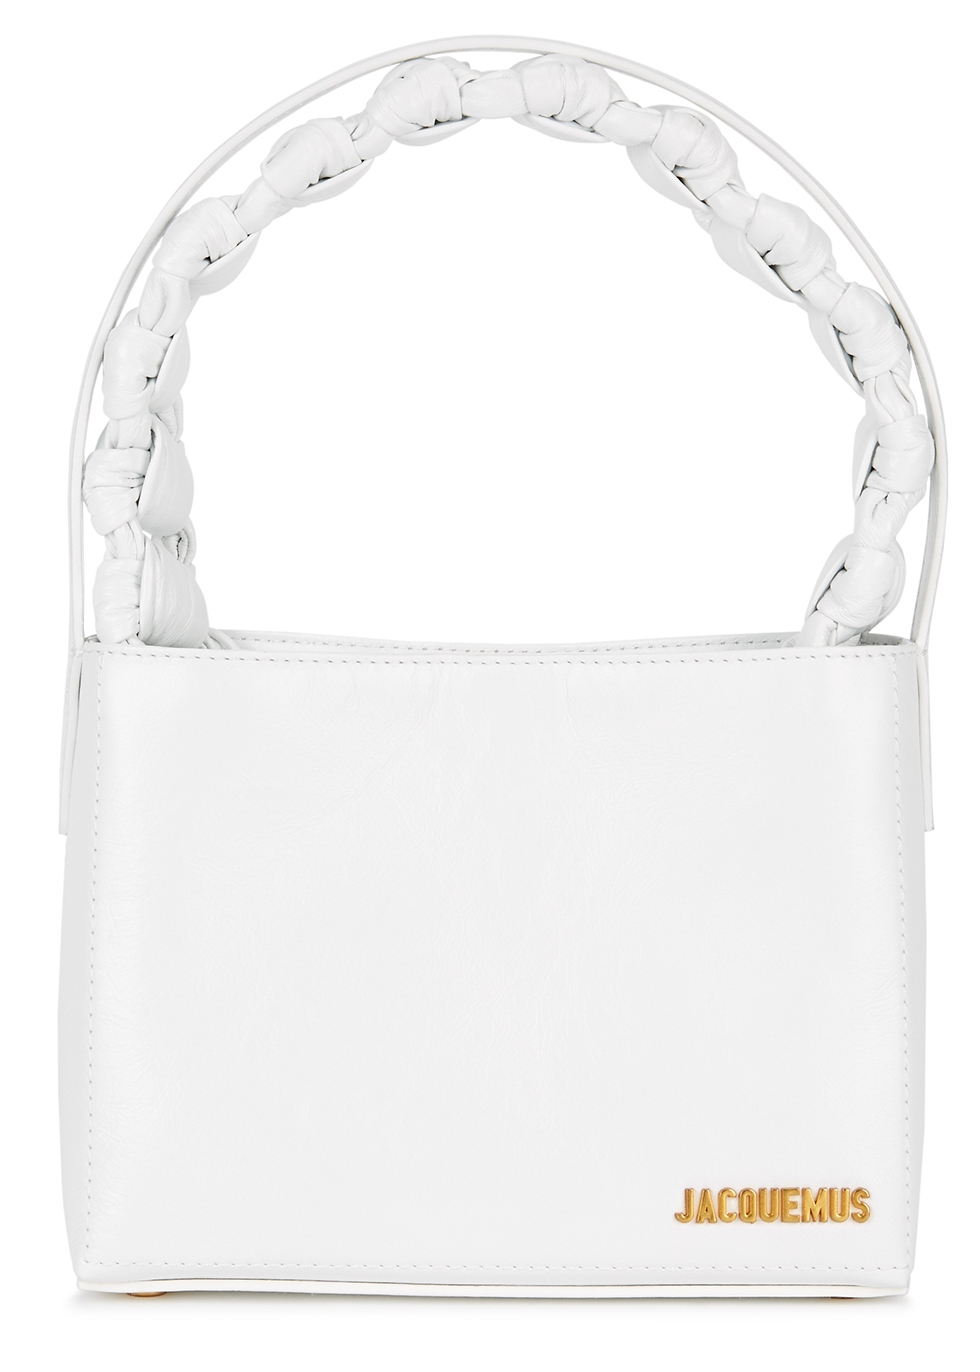 Le Sac Noeud white leather top handle bag